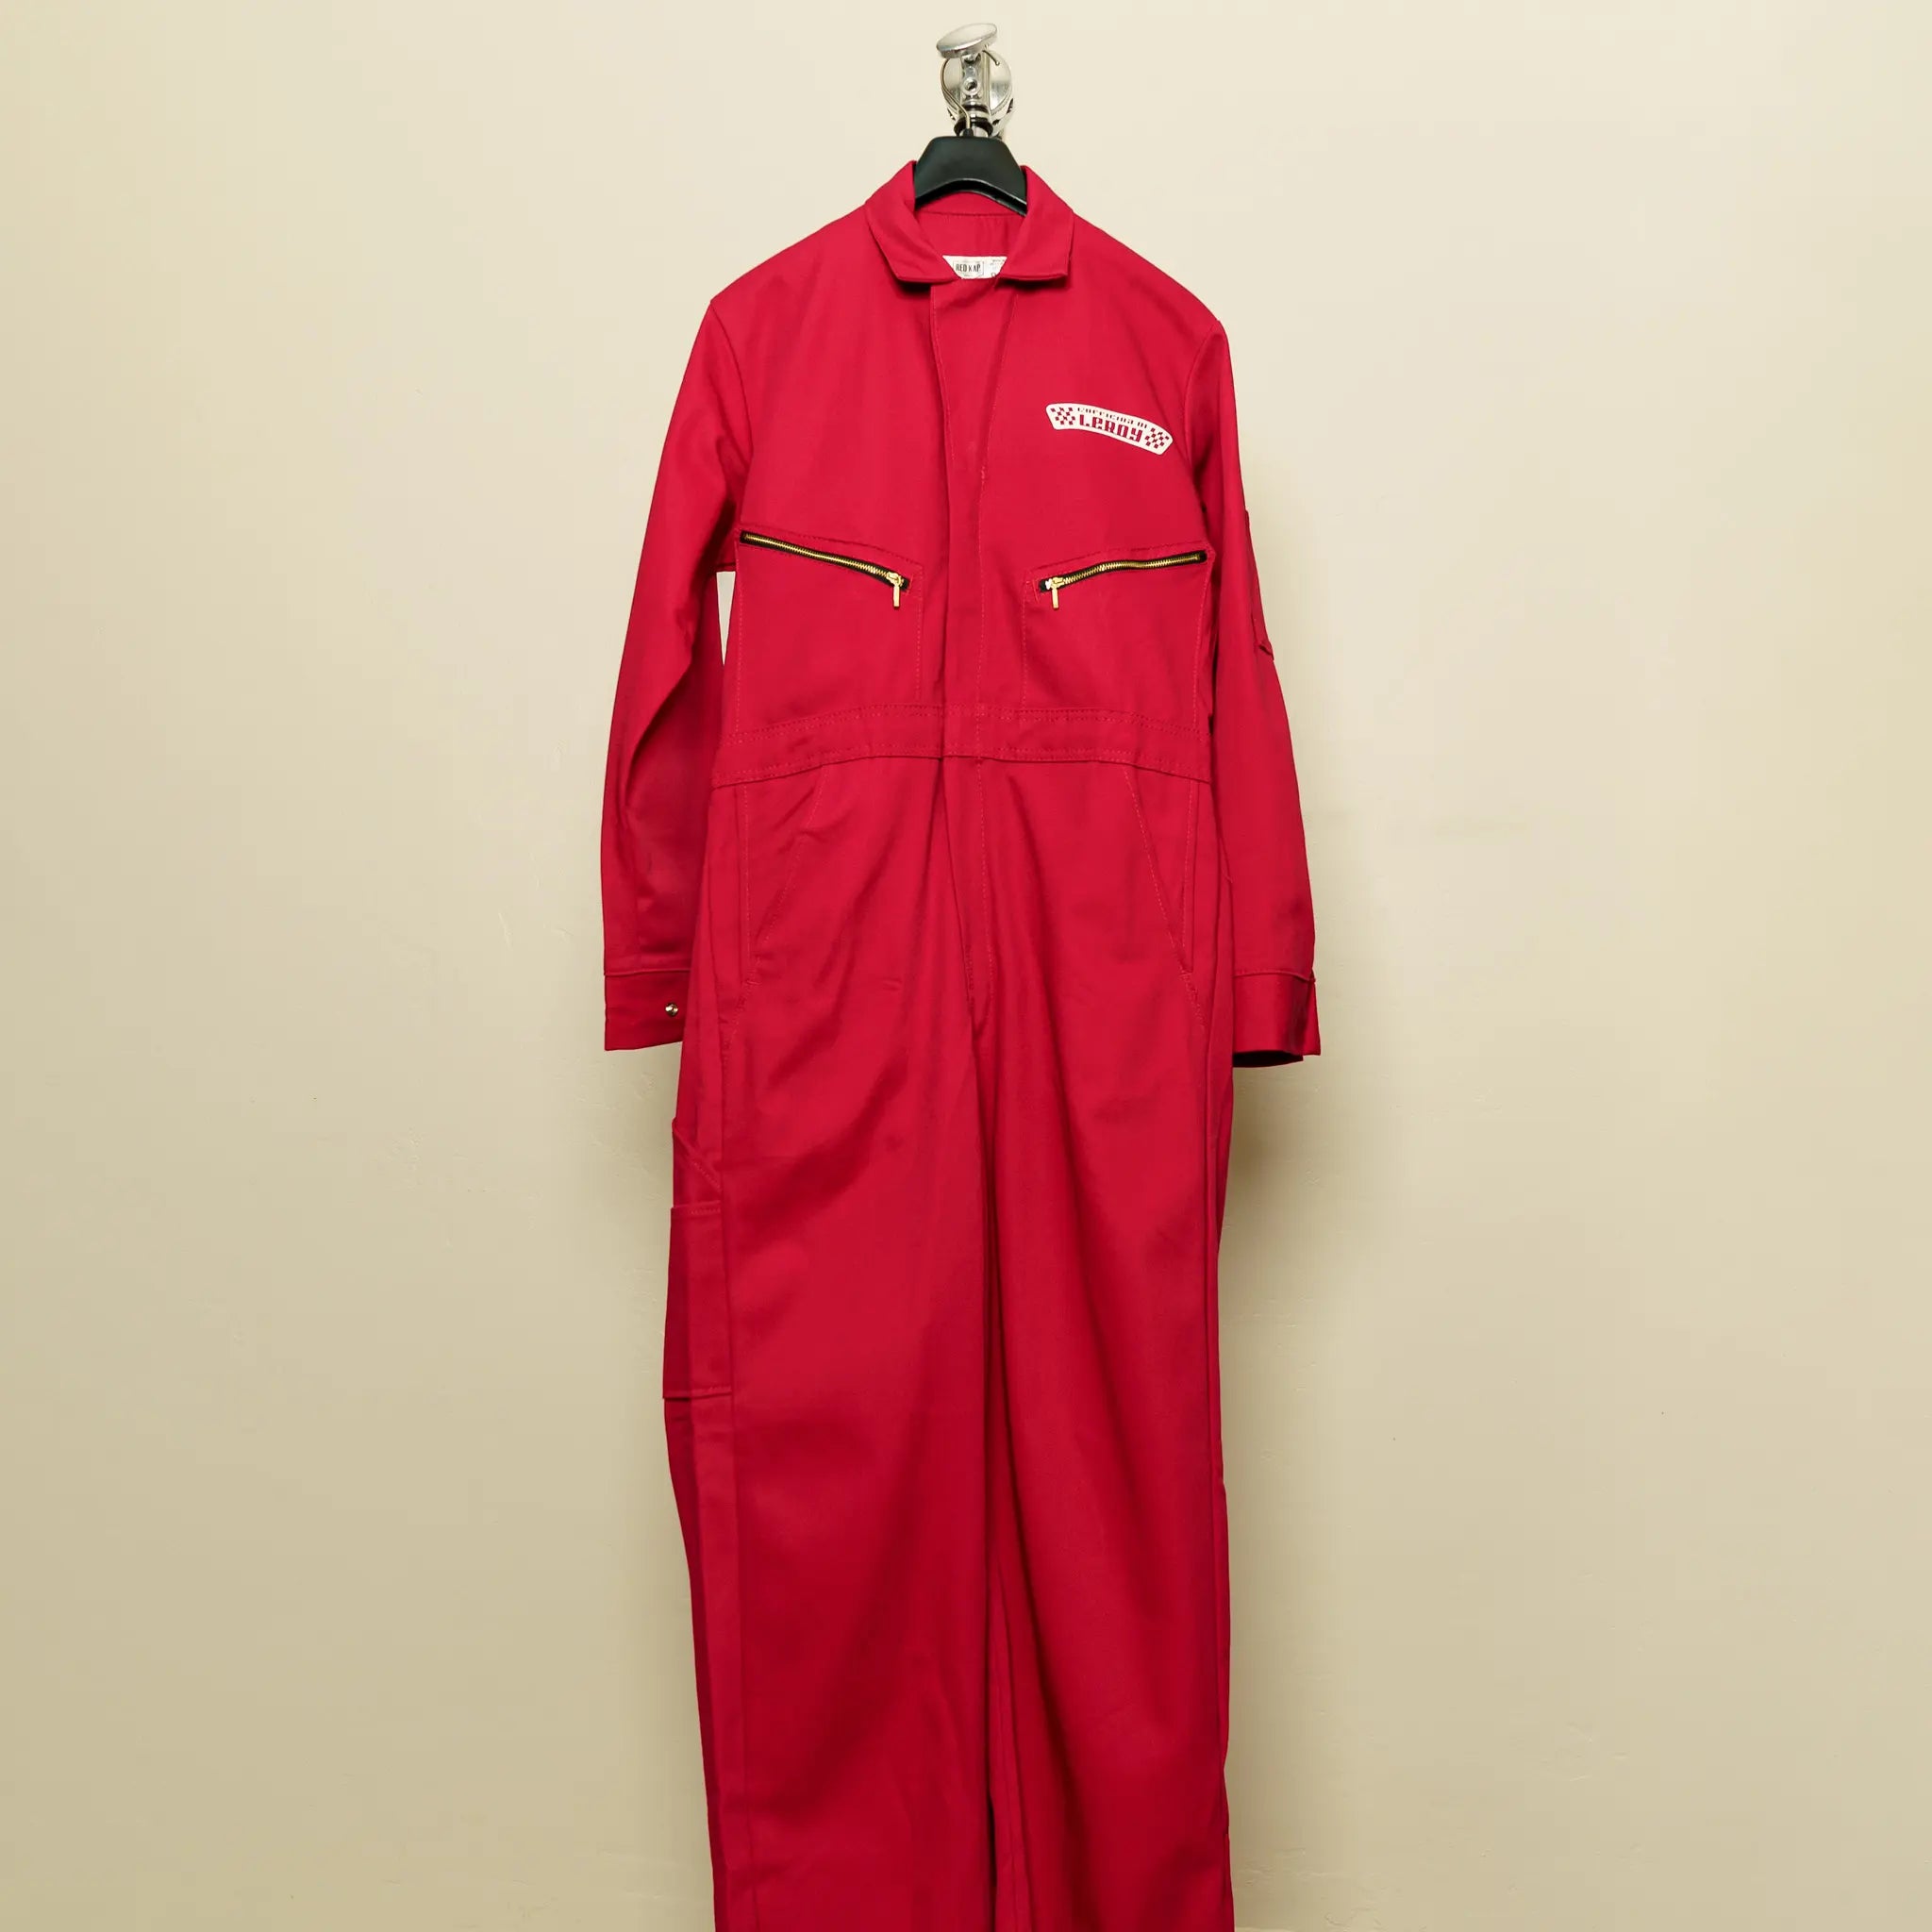 Grind Your Sins Away Long Sleeve Red Coveralls